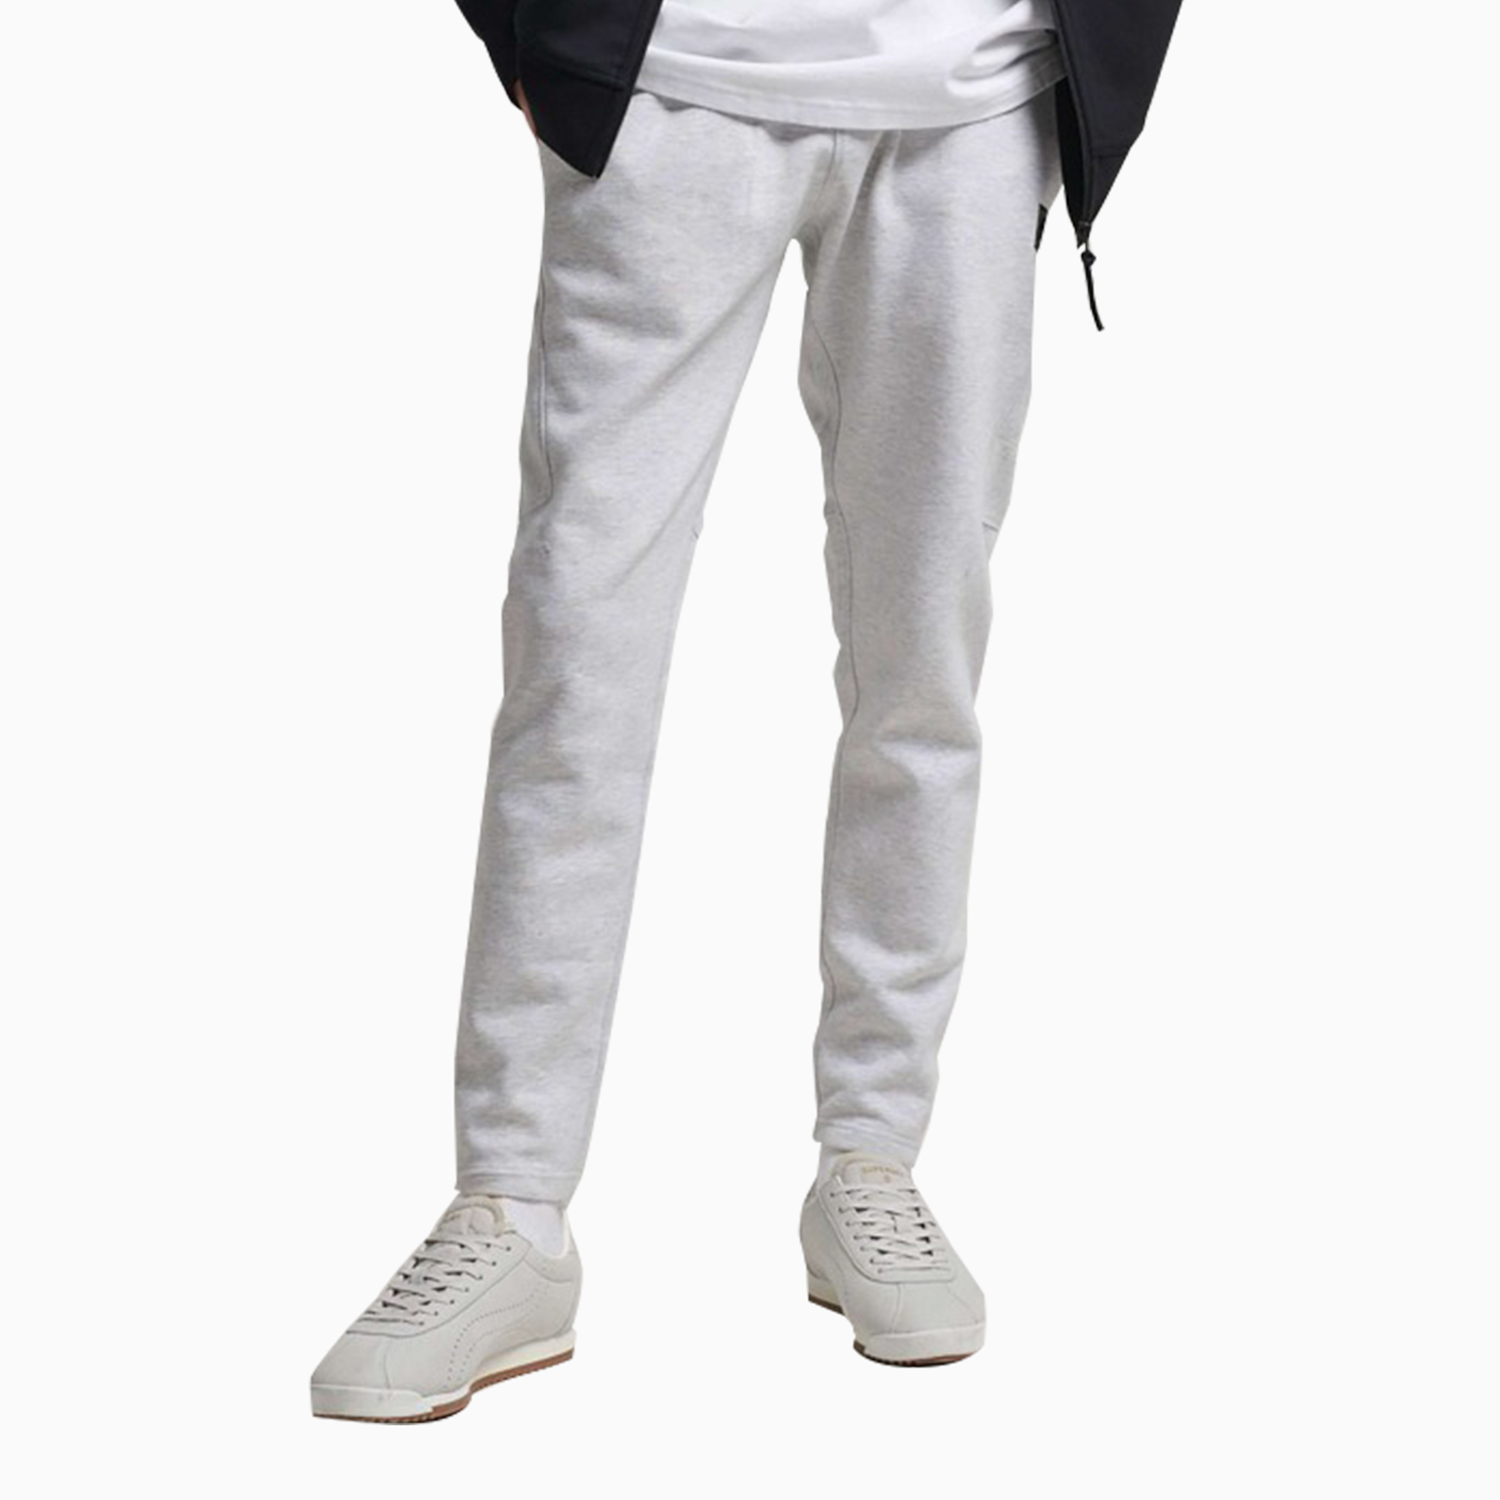 Superdry Men's Code Tech Tracksuit - Color: Cadet Grey Marl - Tops and Bottoms USA -